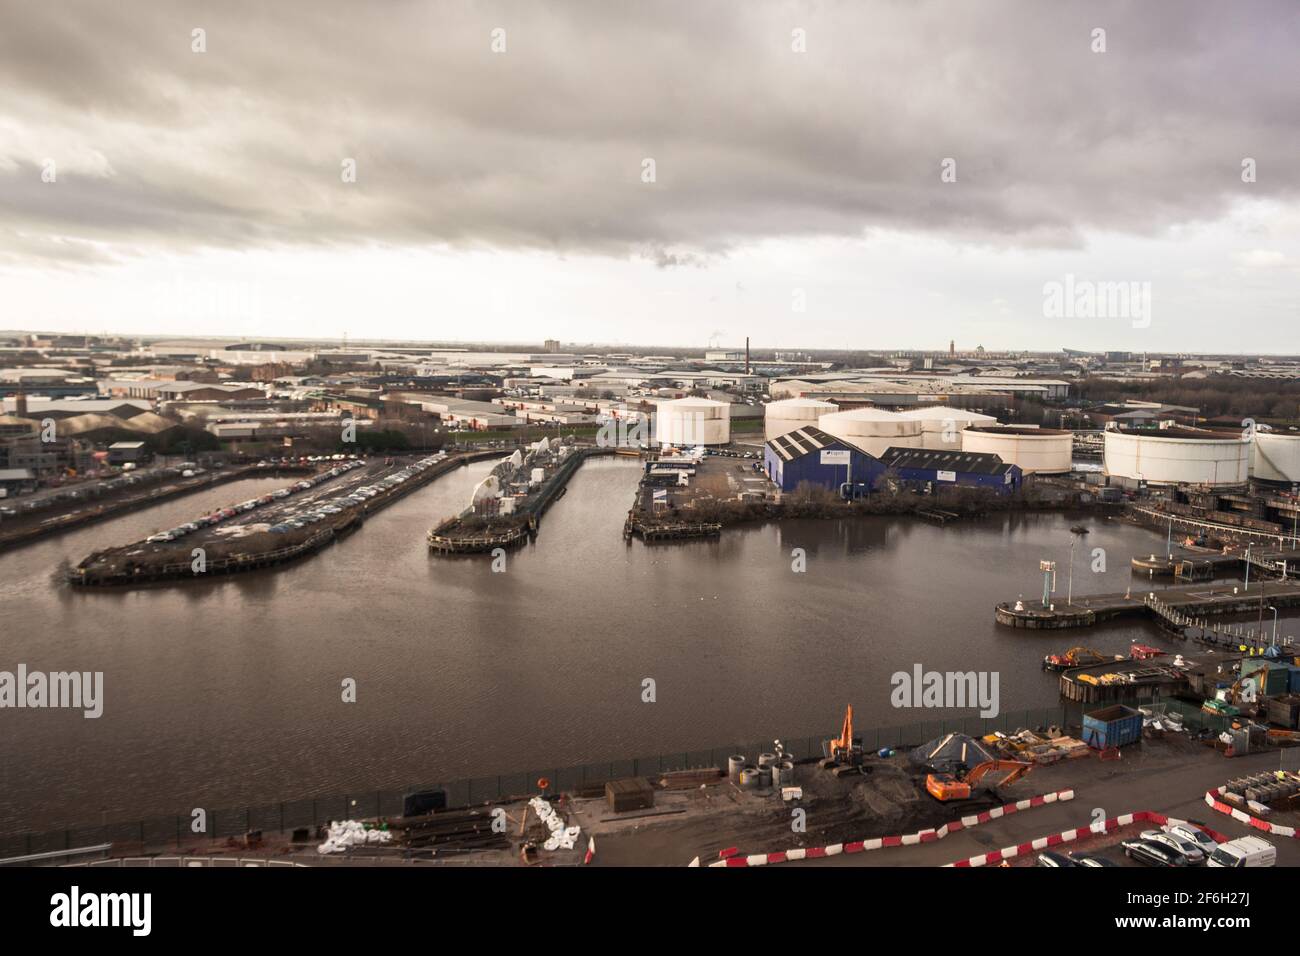 A View Of Trafford Park Looking Over Salford Quays Manchester On A Overcast Day Stock Photo